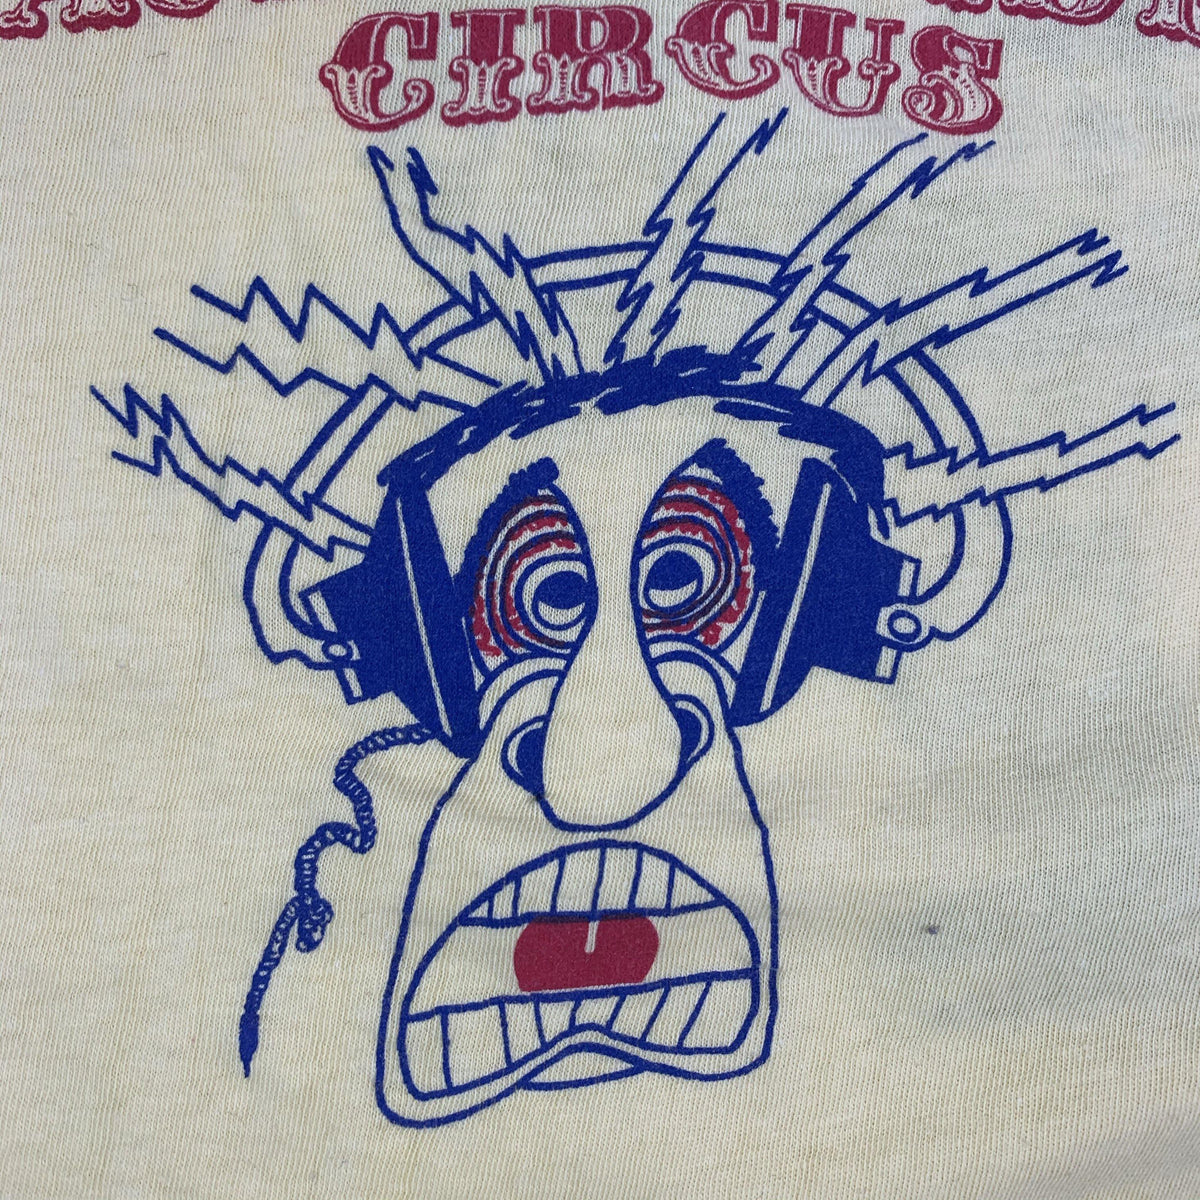 Vintage Luskins Audio Video Circus “The Cheapest” T-Shirt - jointcustodydc